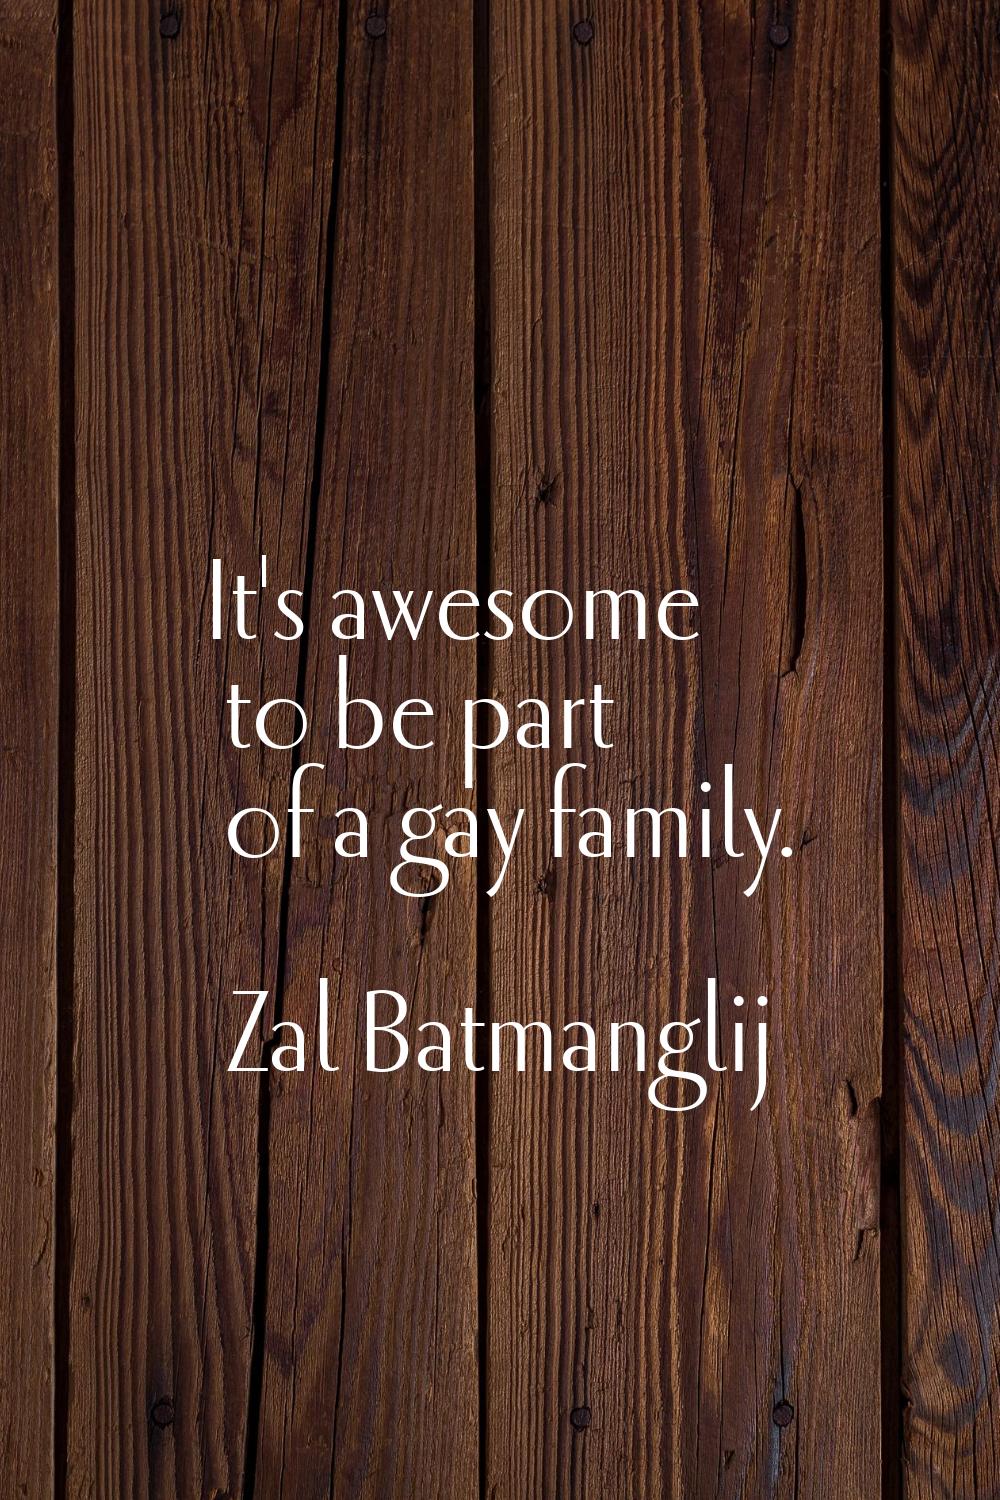 It's awesome to be part of a gay family.